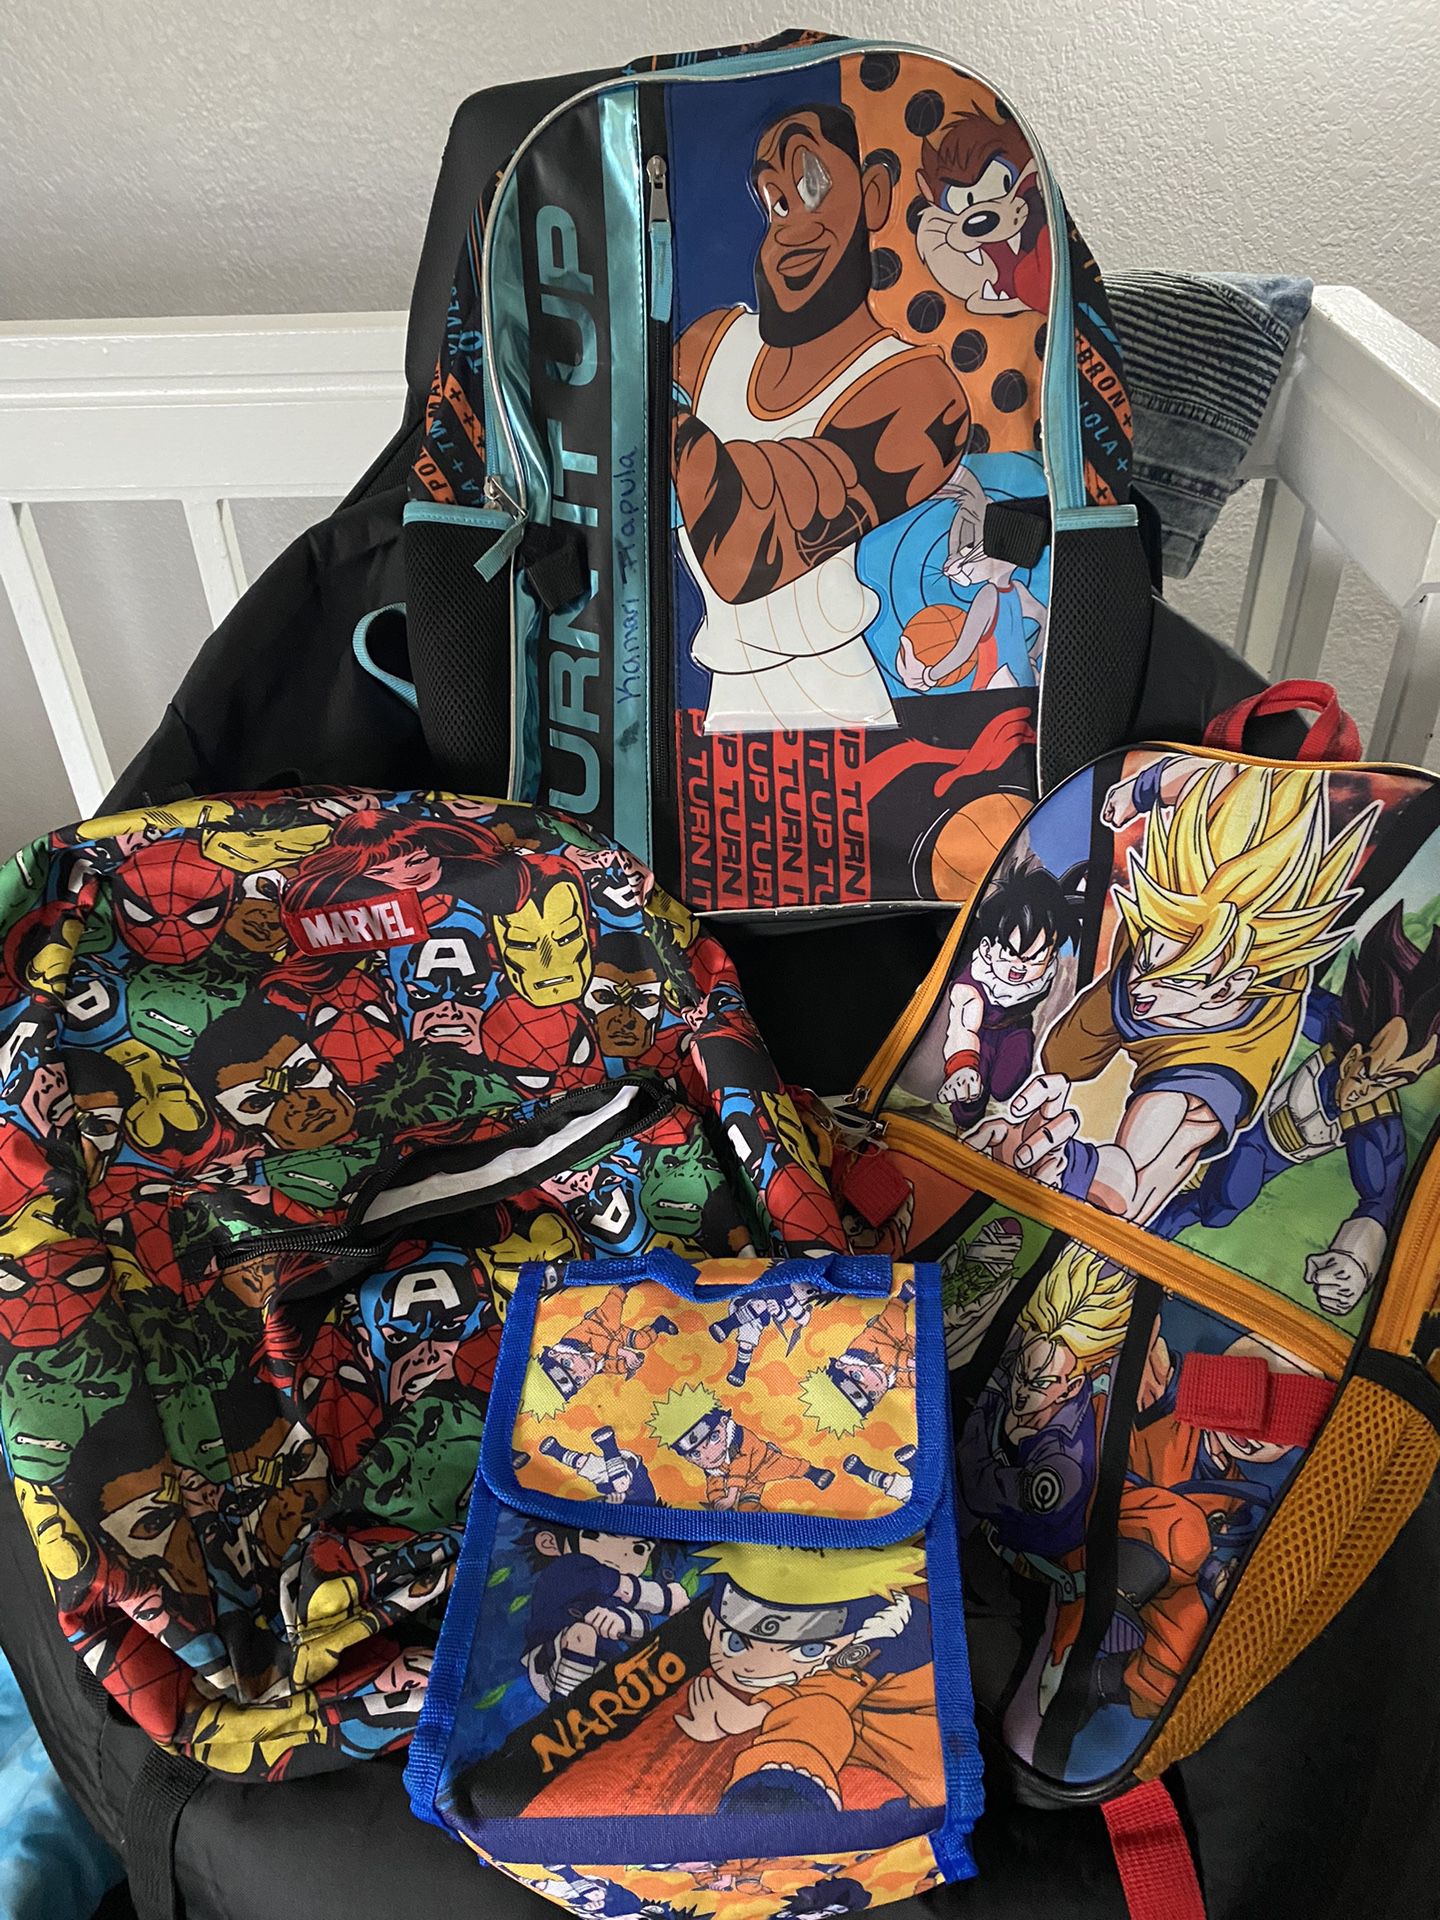 Used Book Bags And 1 Lunch Bag